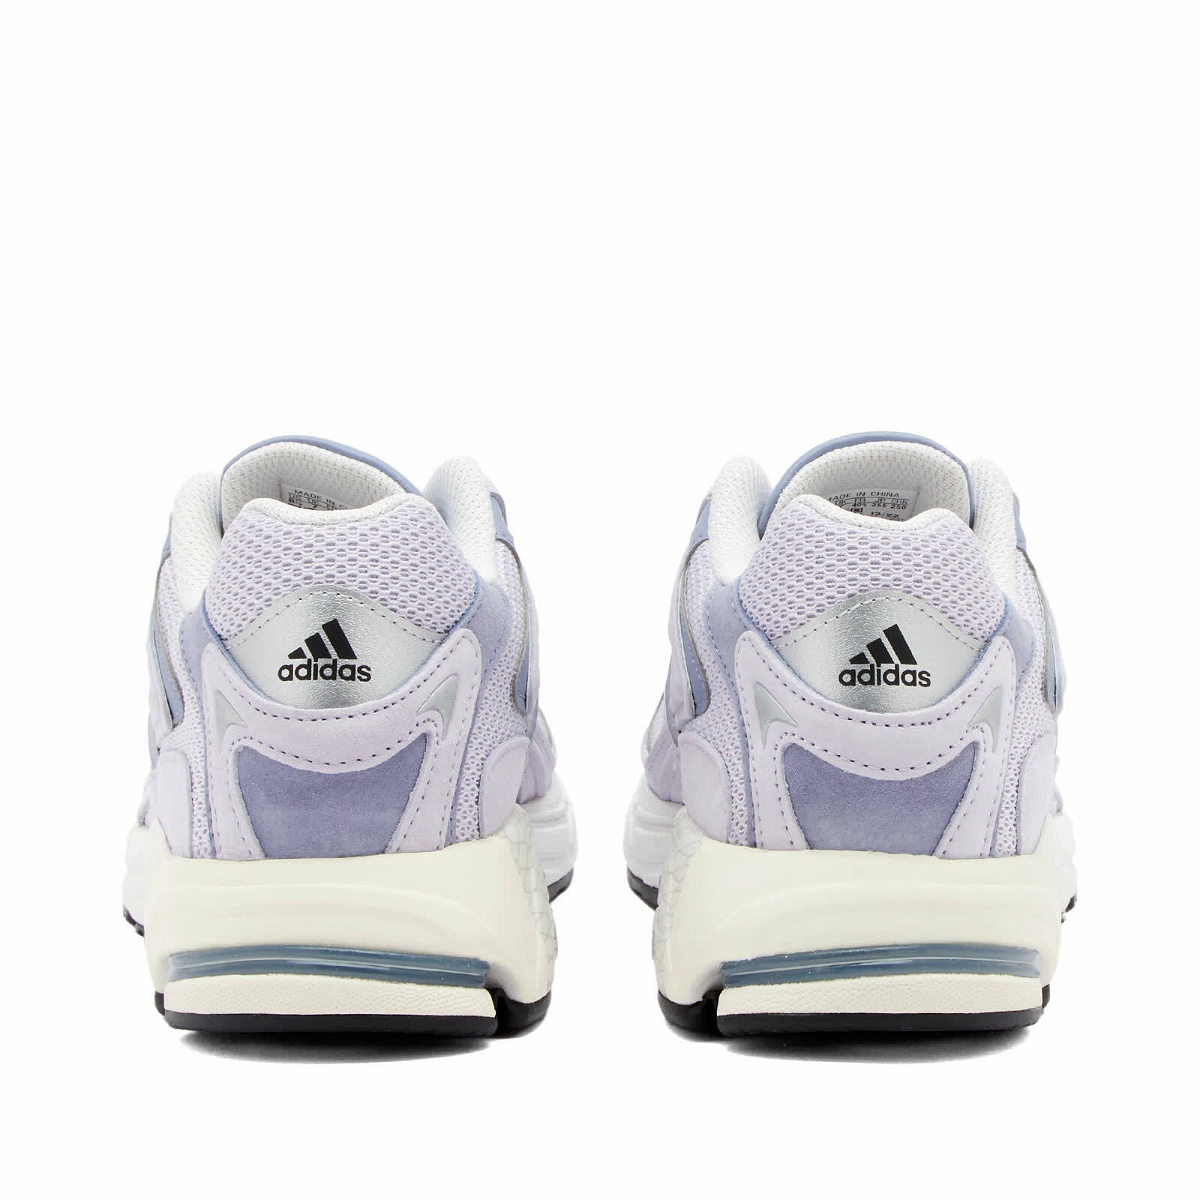 adidas Sneakers Adidas CL W in Dawn/Violet/Crystal Silver Women\'s Response